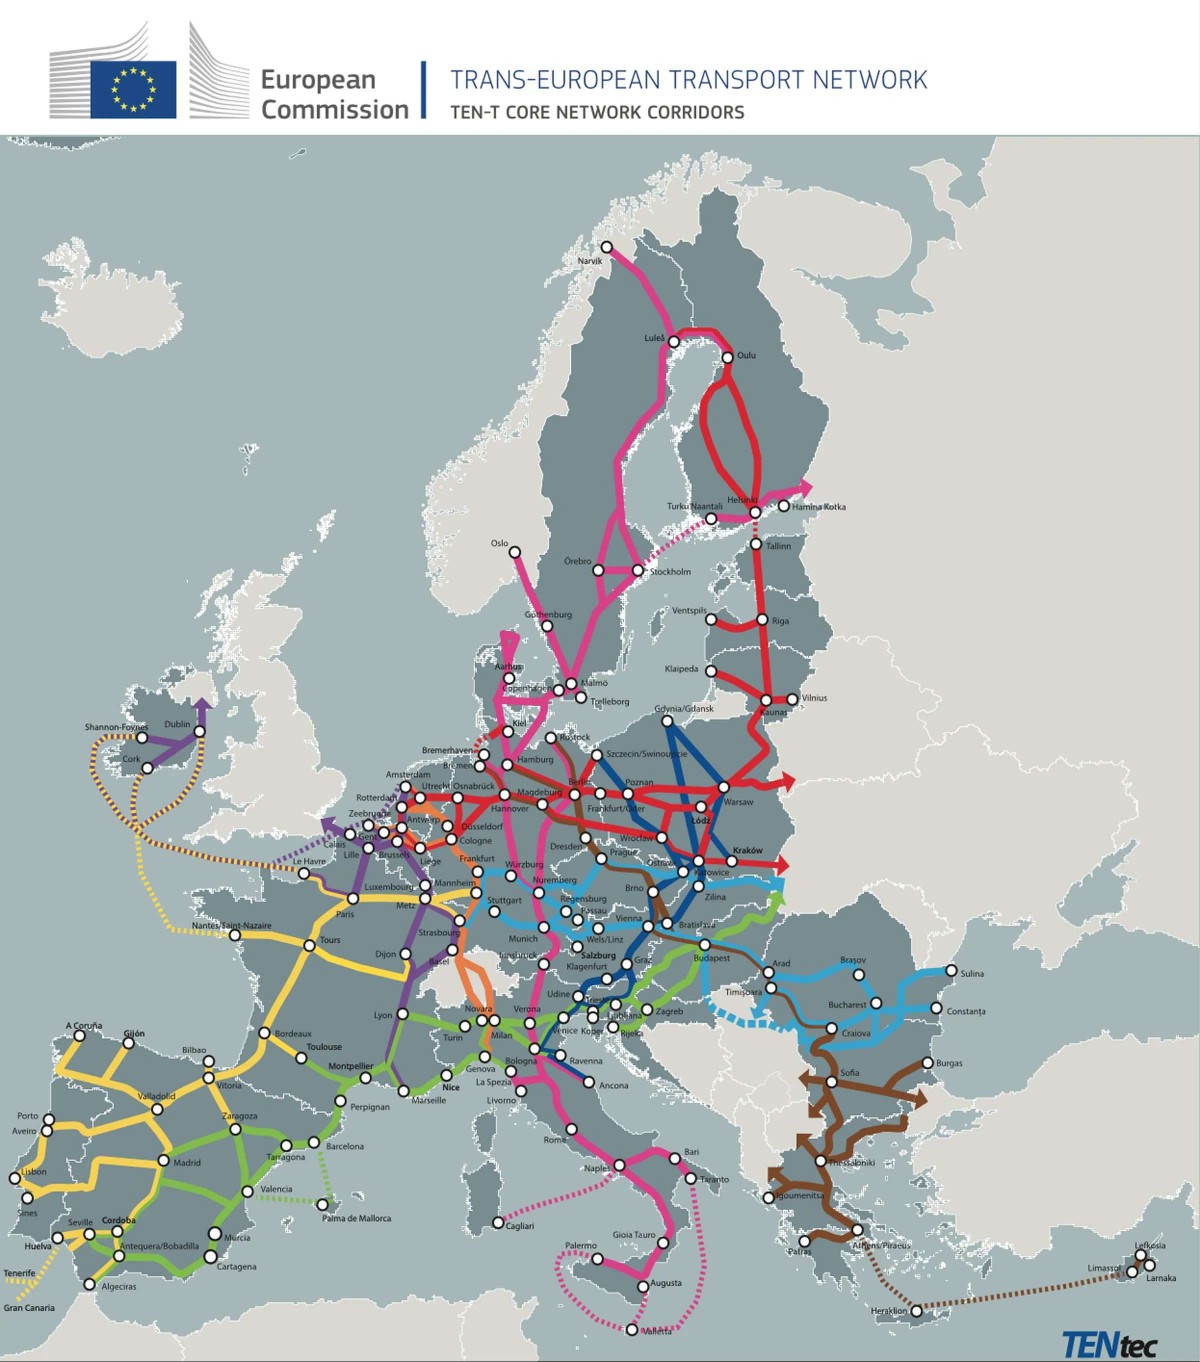 EU adopts law to cover core road network in fast chargers at every 60km from 2025